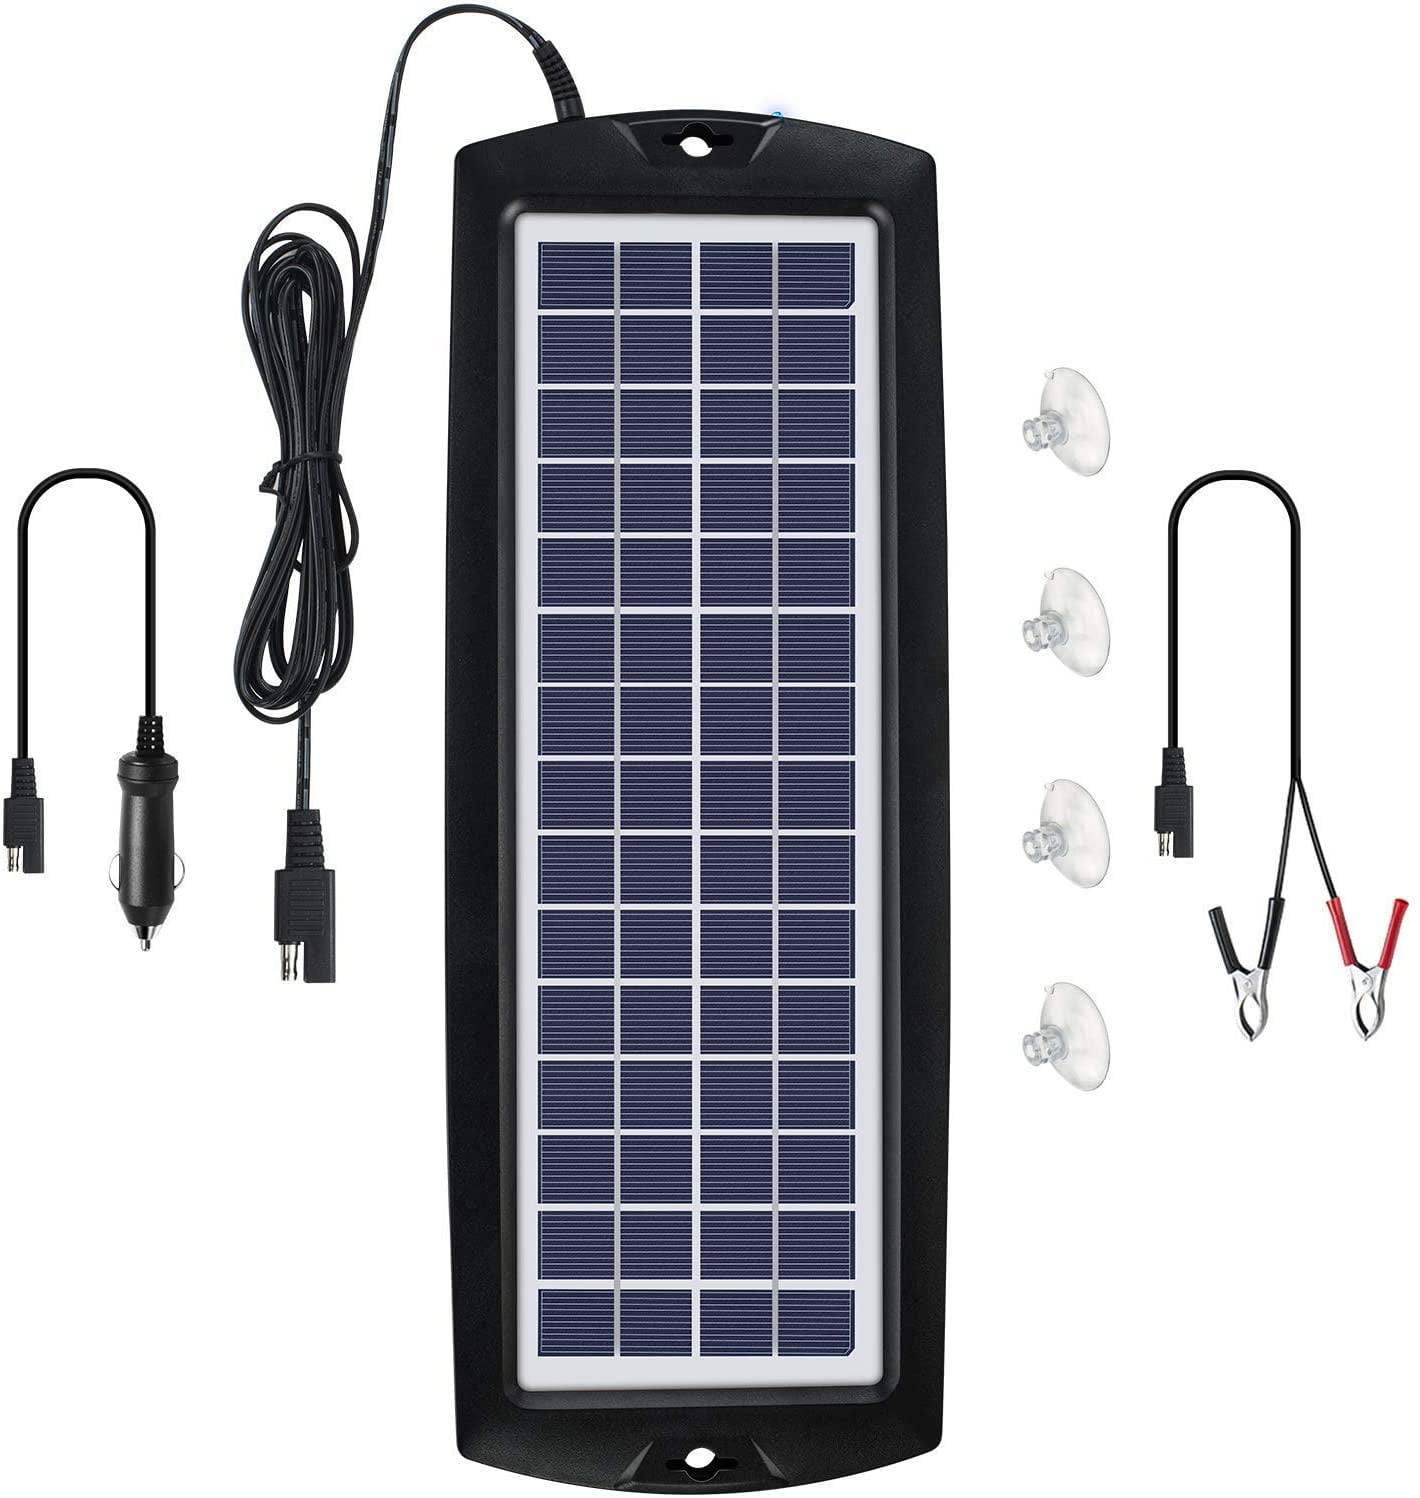 12V Car Camping Boat Battery Charger Solar Panel System DIY Module Cell X5A9 